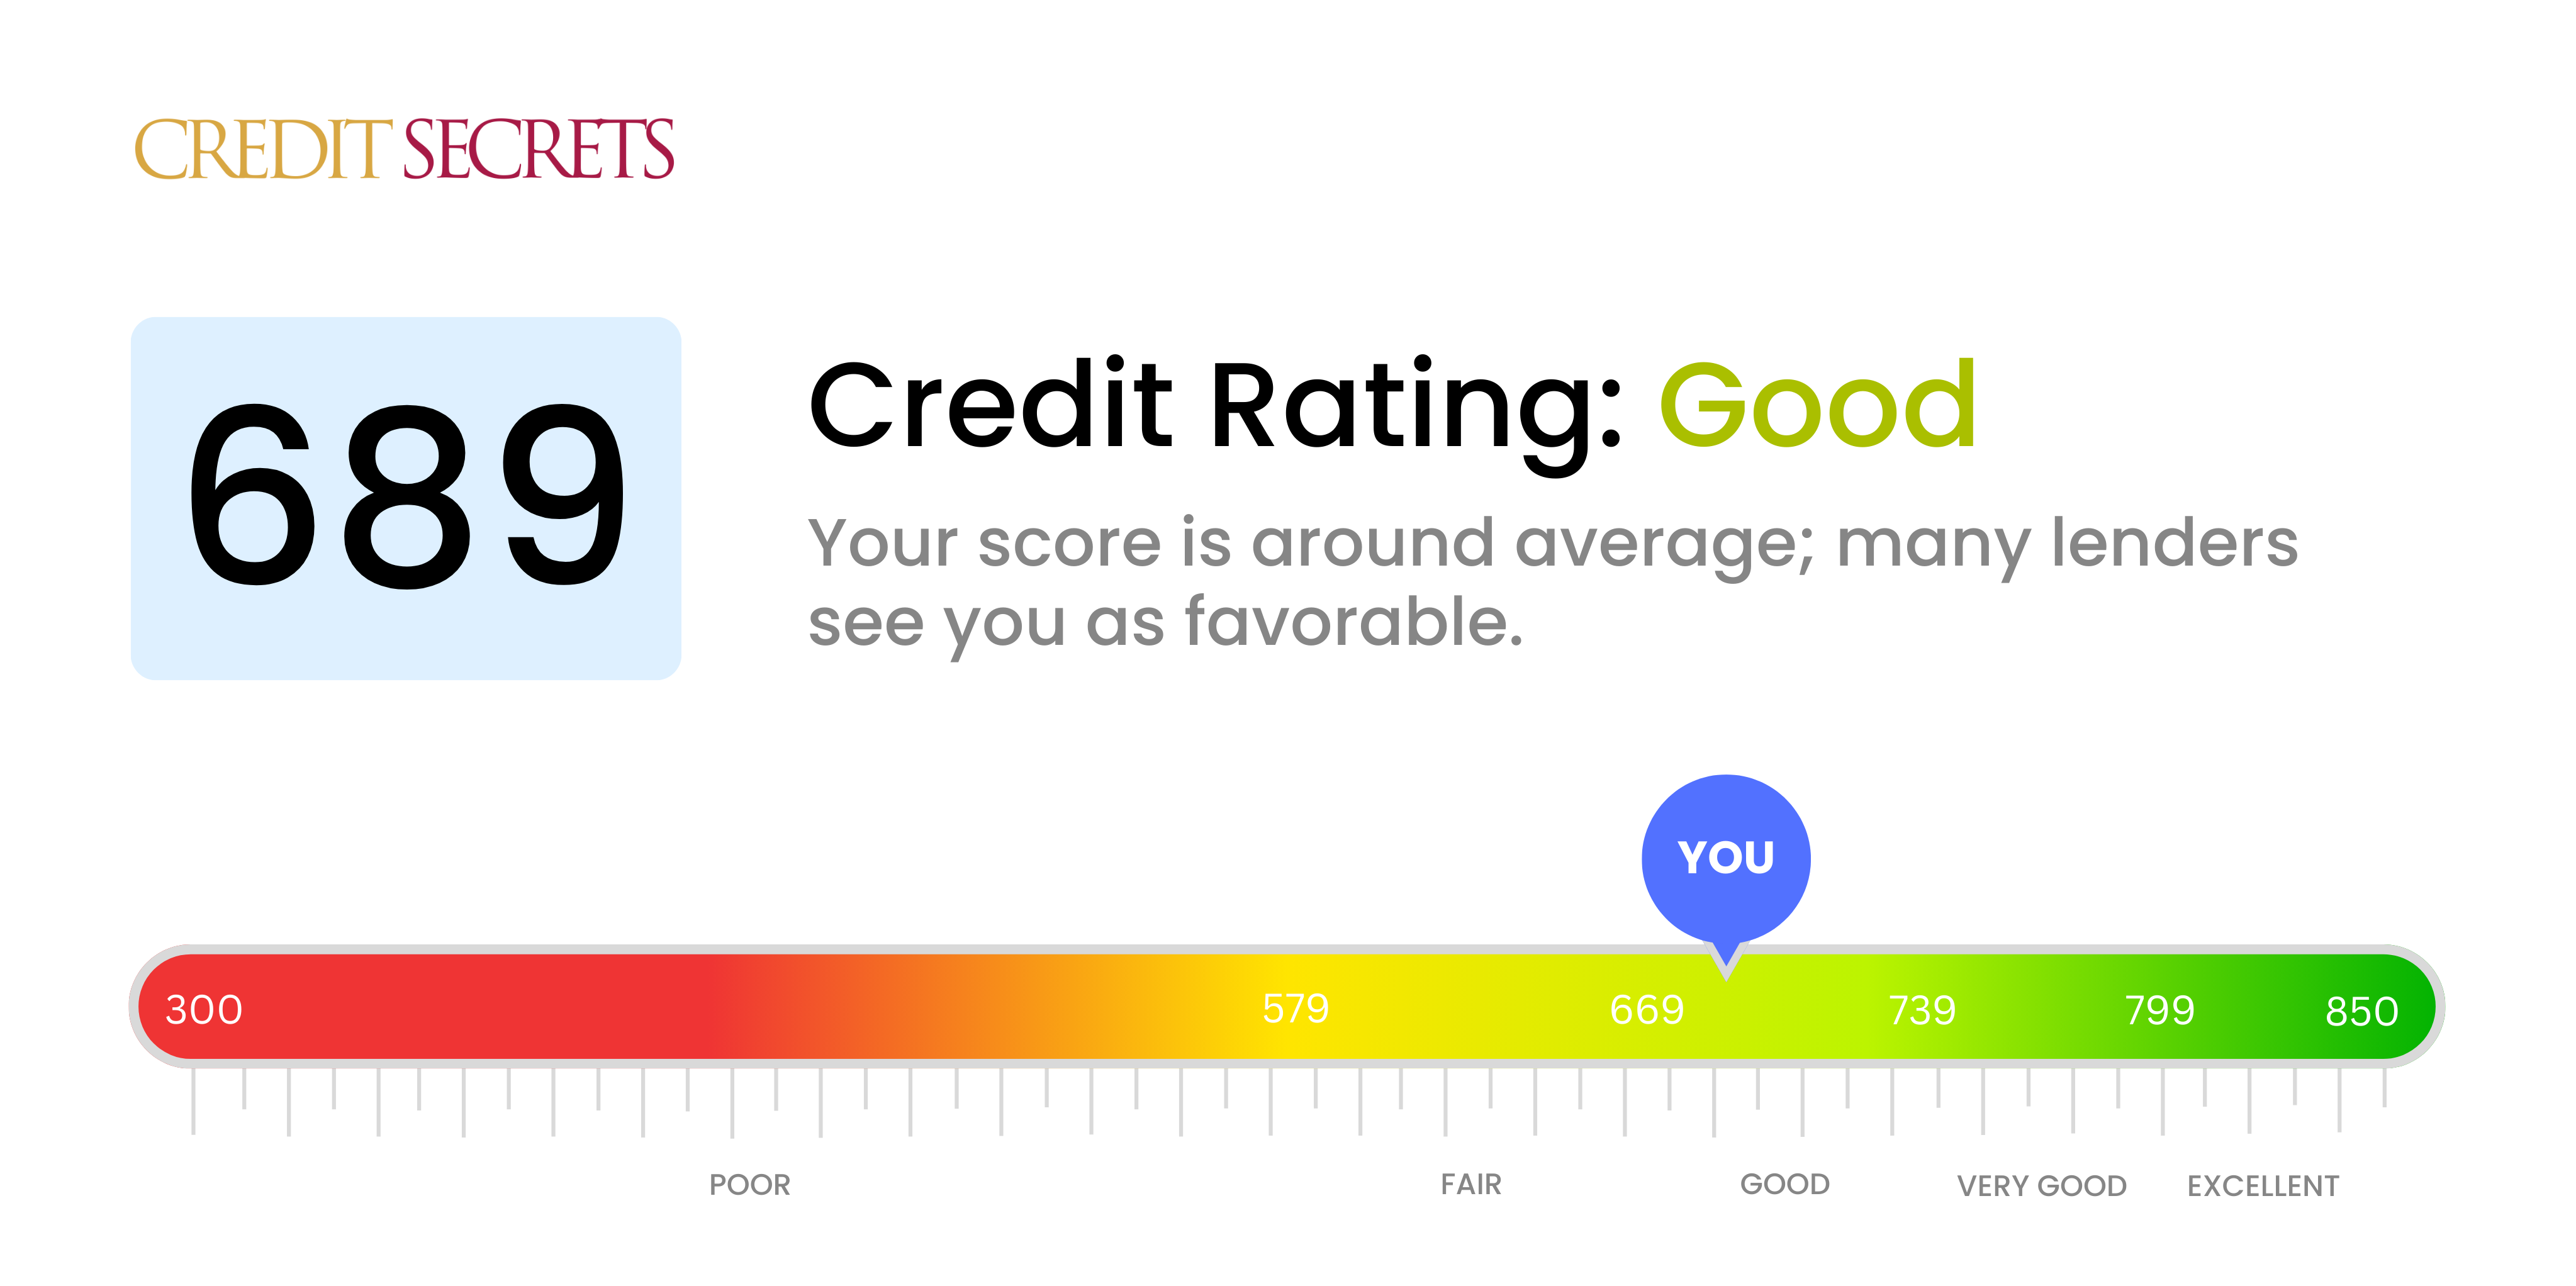 Is 689 a good credit score?